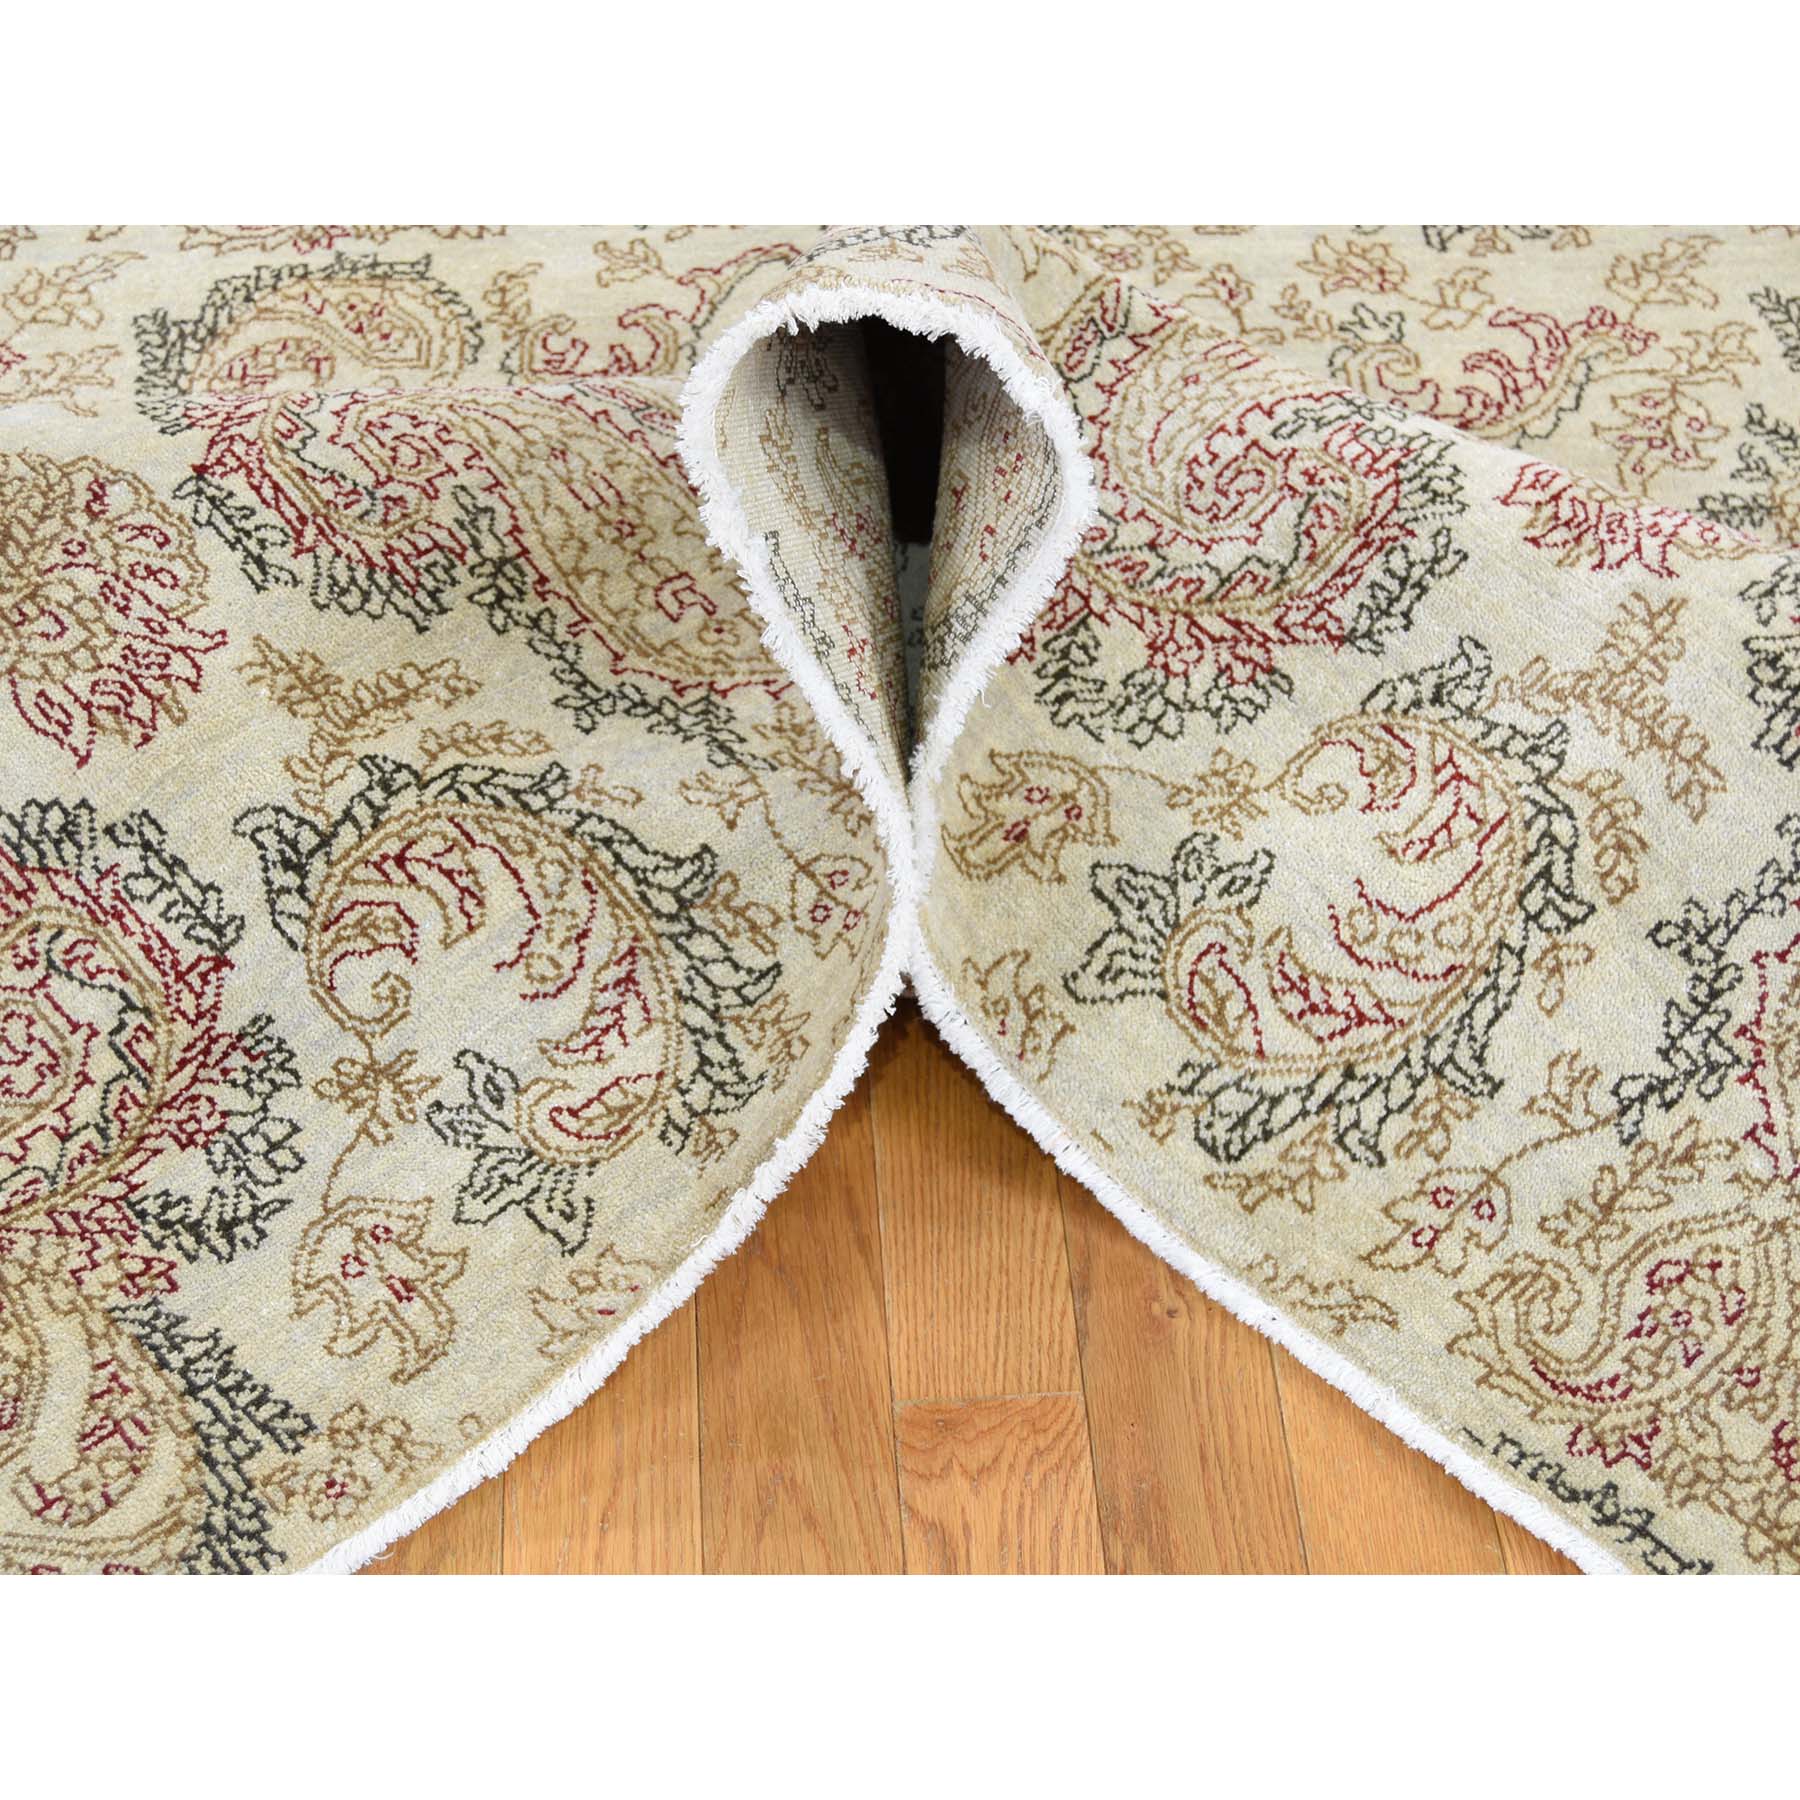 9-1 x12-3  Agra with Paisley Design 100 Percent Wool Hand-Knotted Oriental Rug 